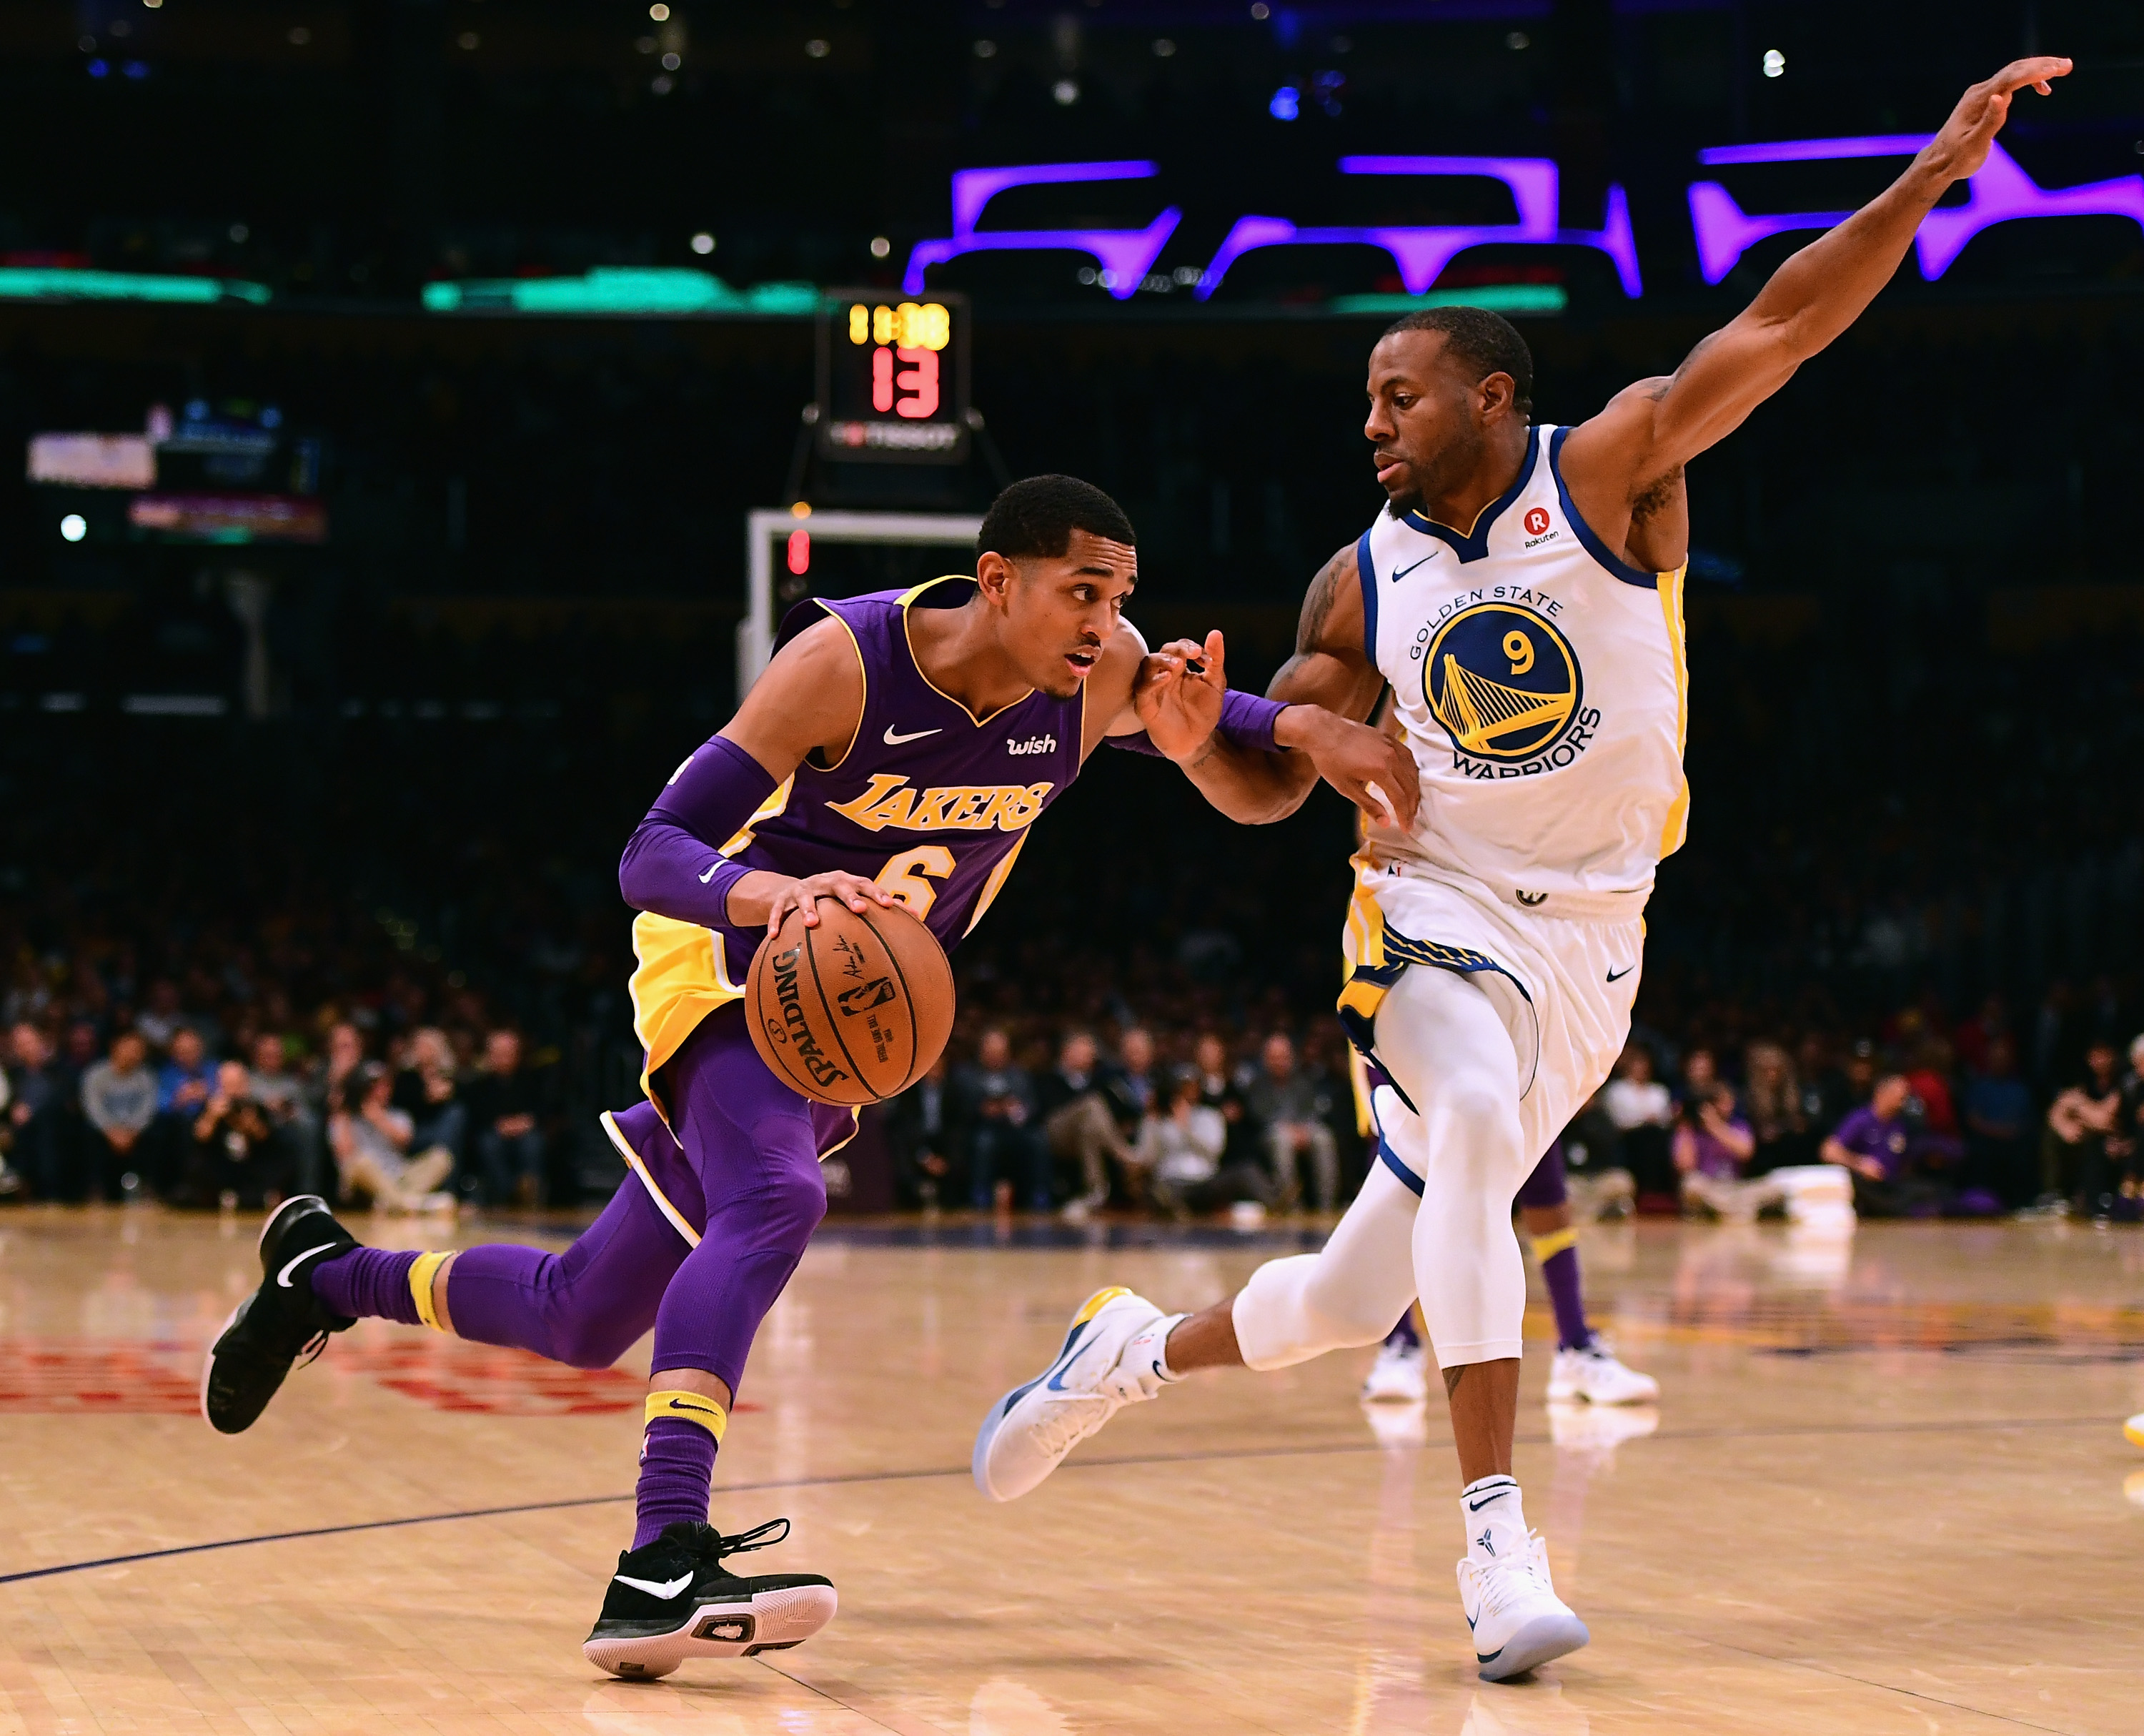 Could The Lakers No. 6 Jordan Clarkson Be 'Sixth Man Of The Year